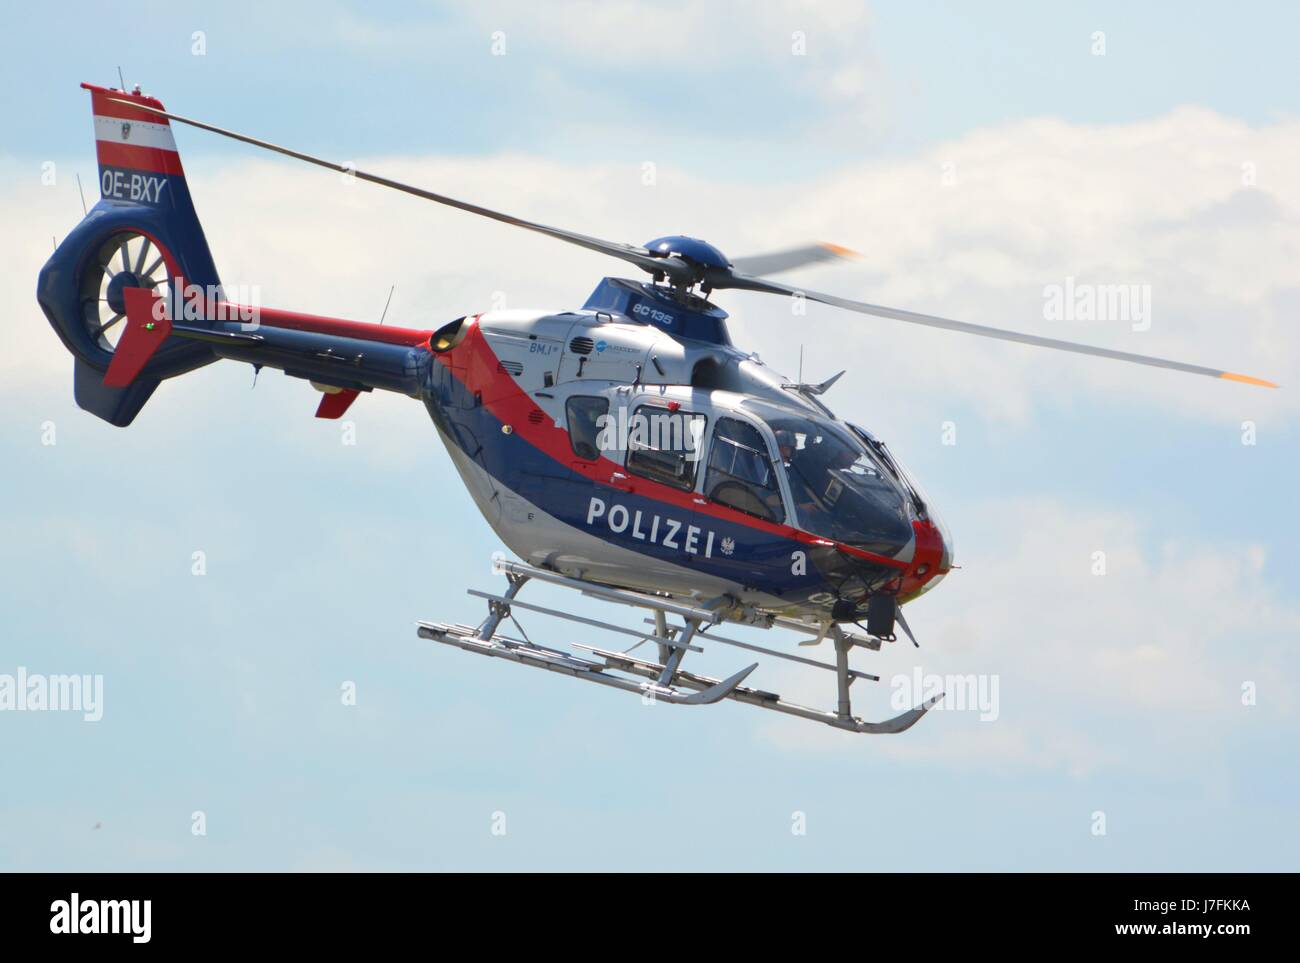 Austrian Police helicopter taking off Stock Photo